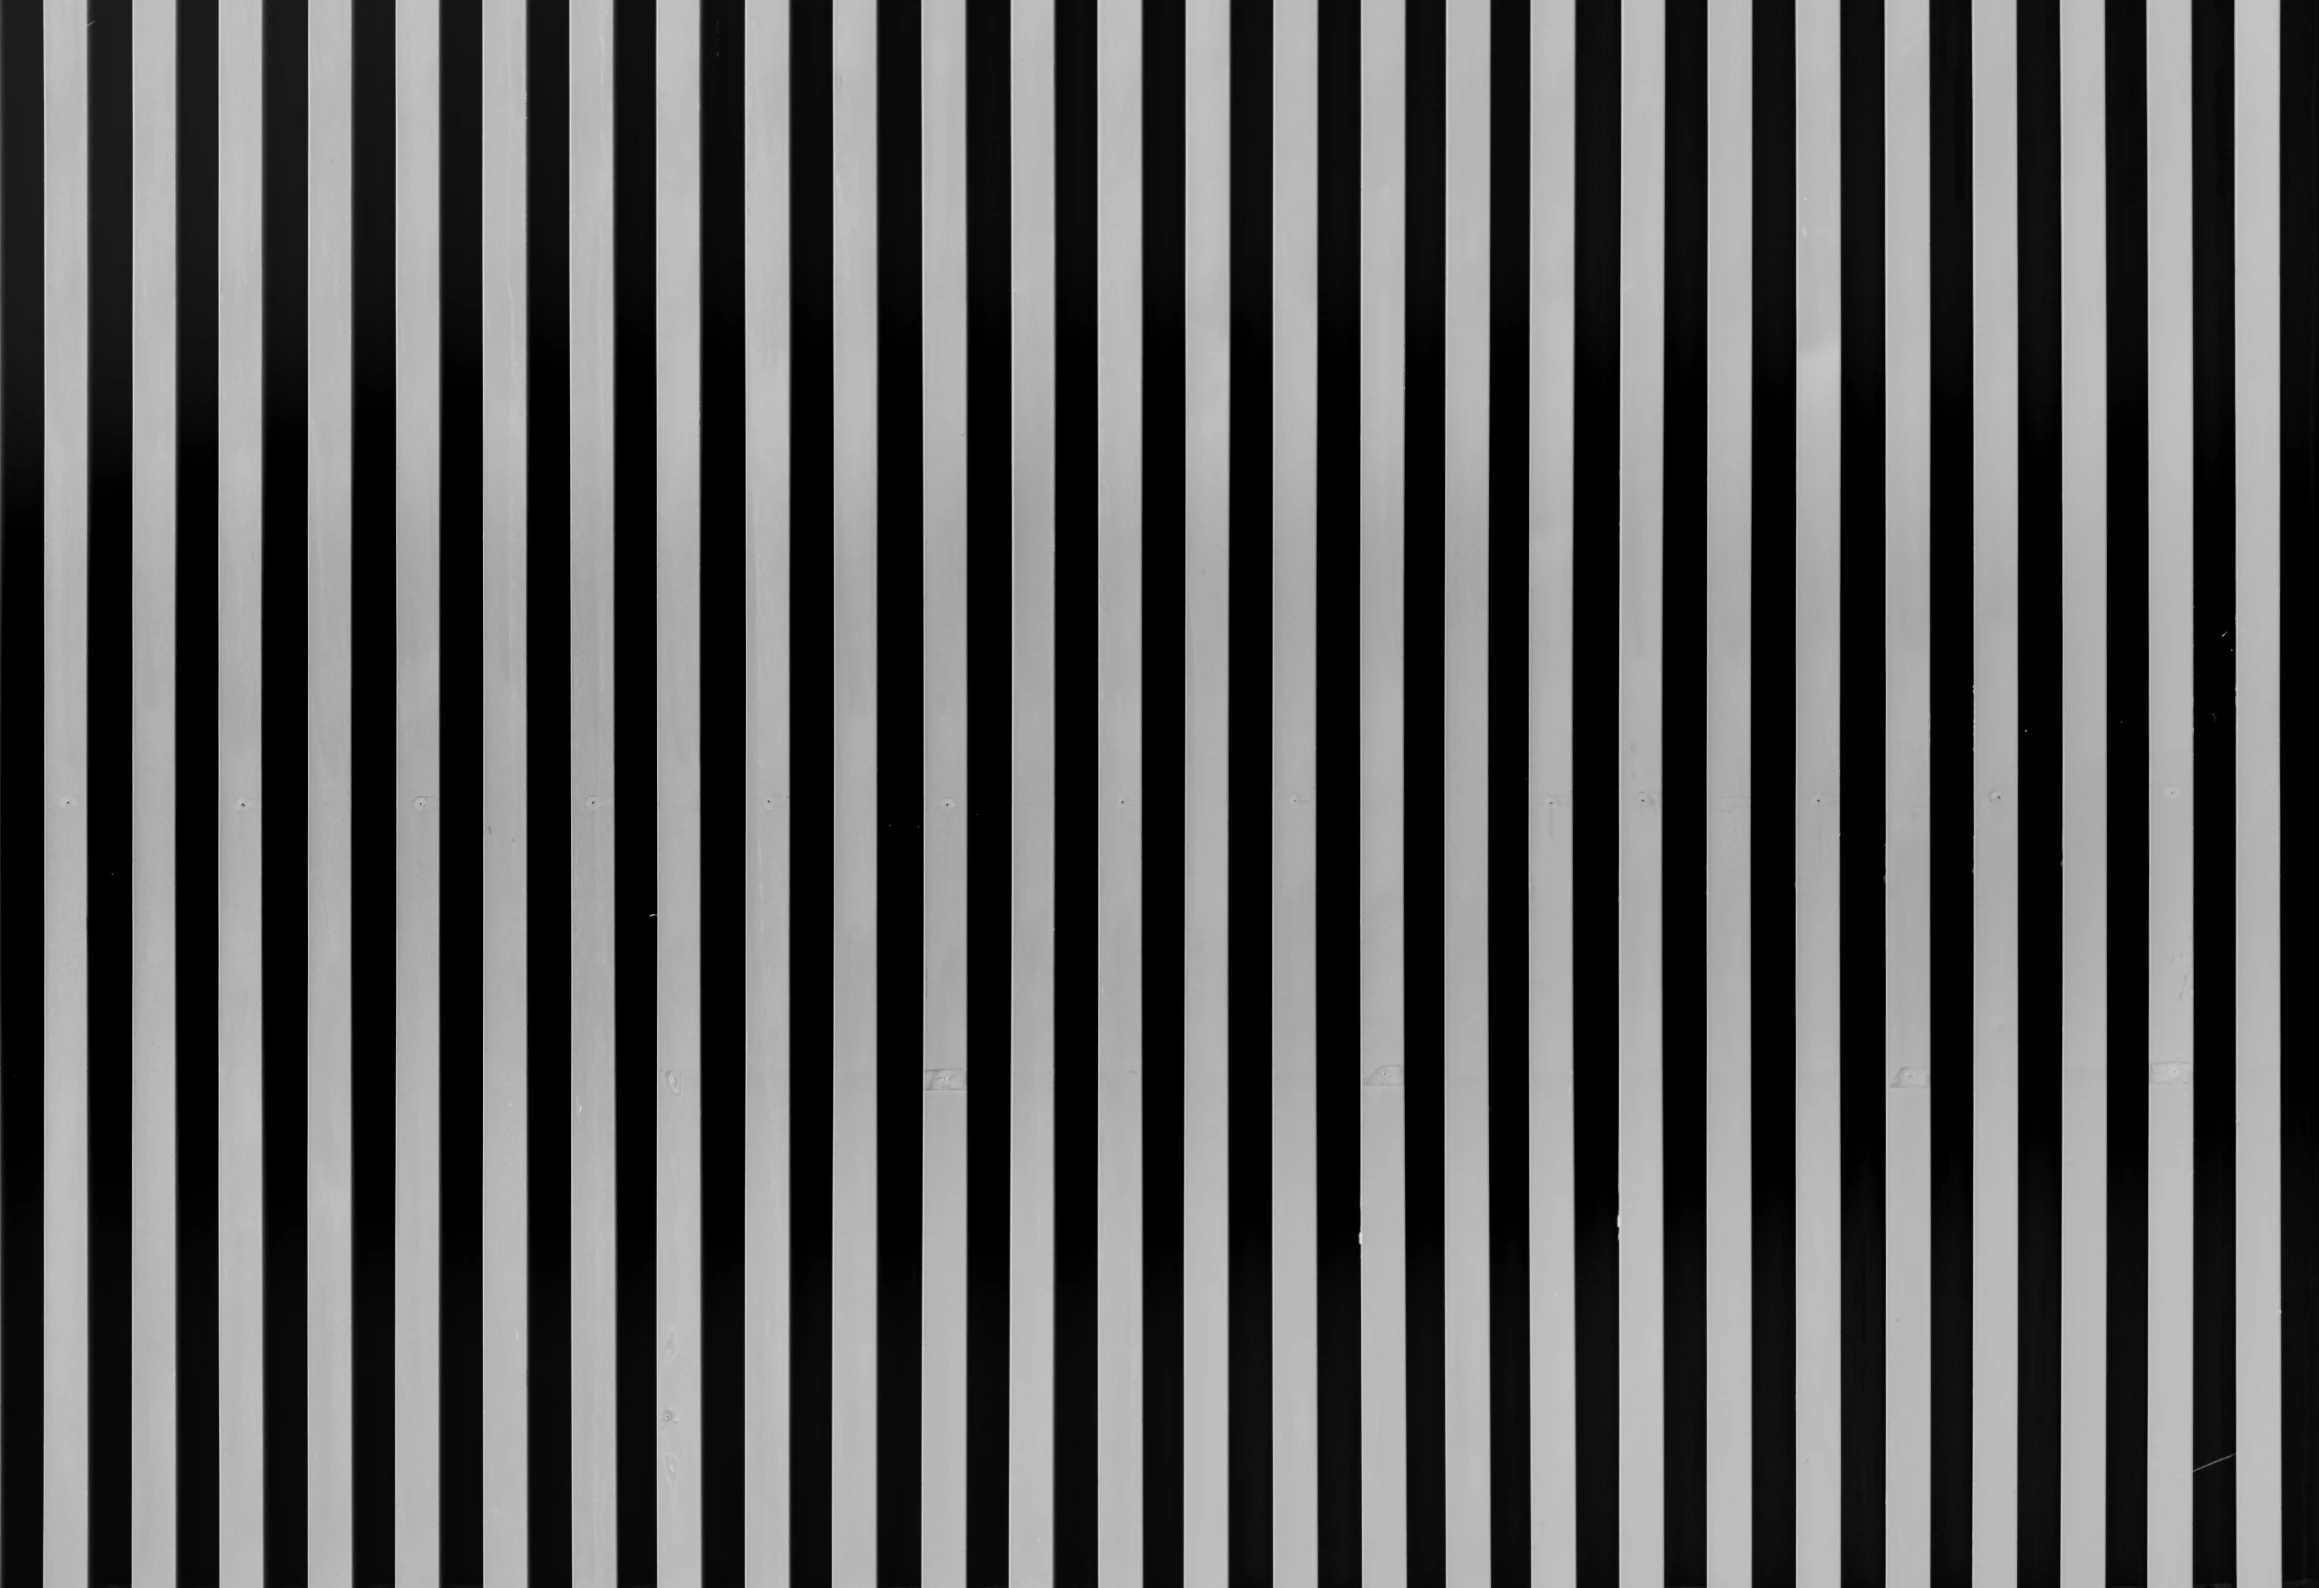 a pattern designed with black and white stripes